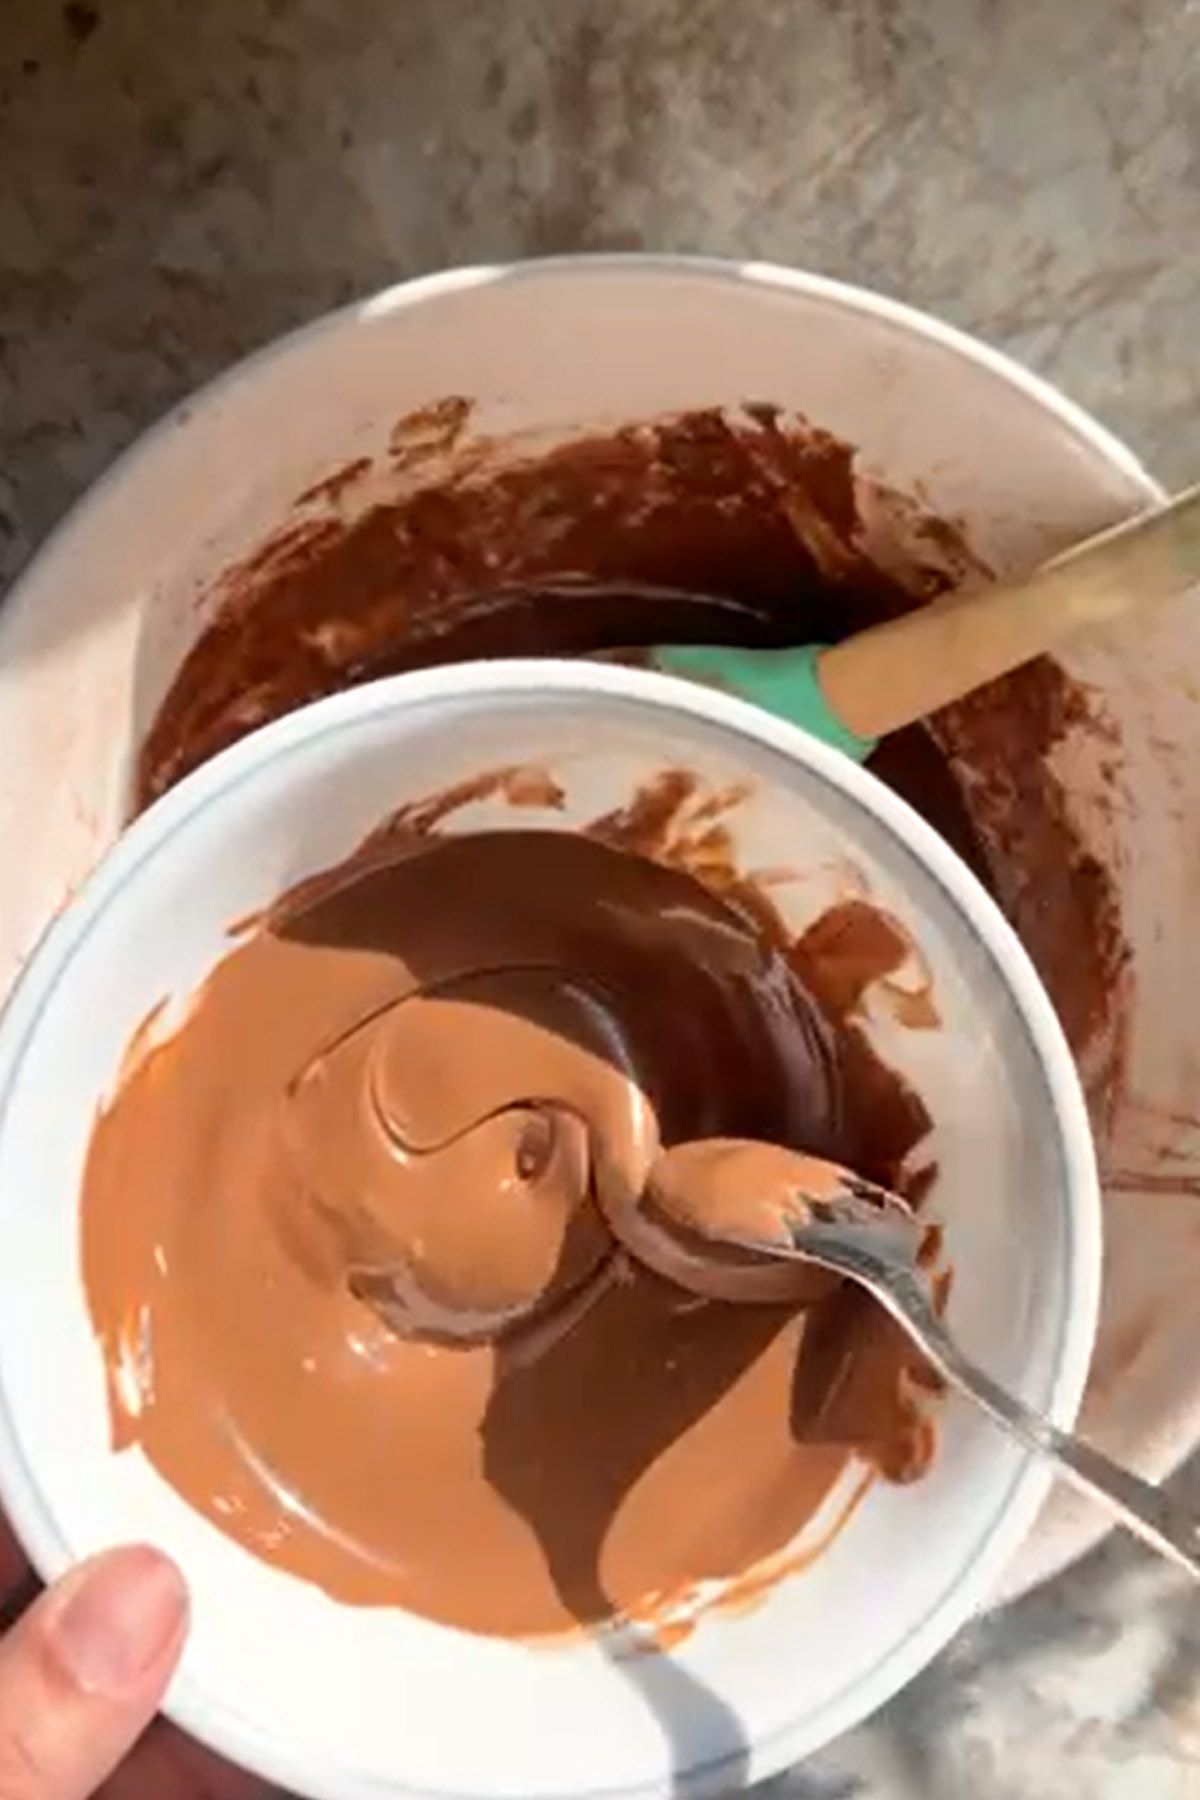 Melted chocolate is stirred.